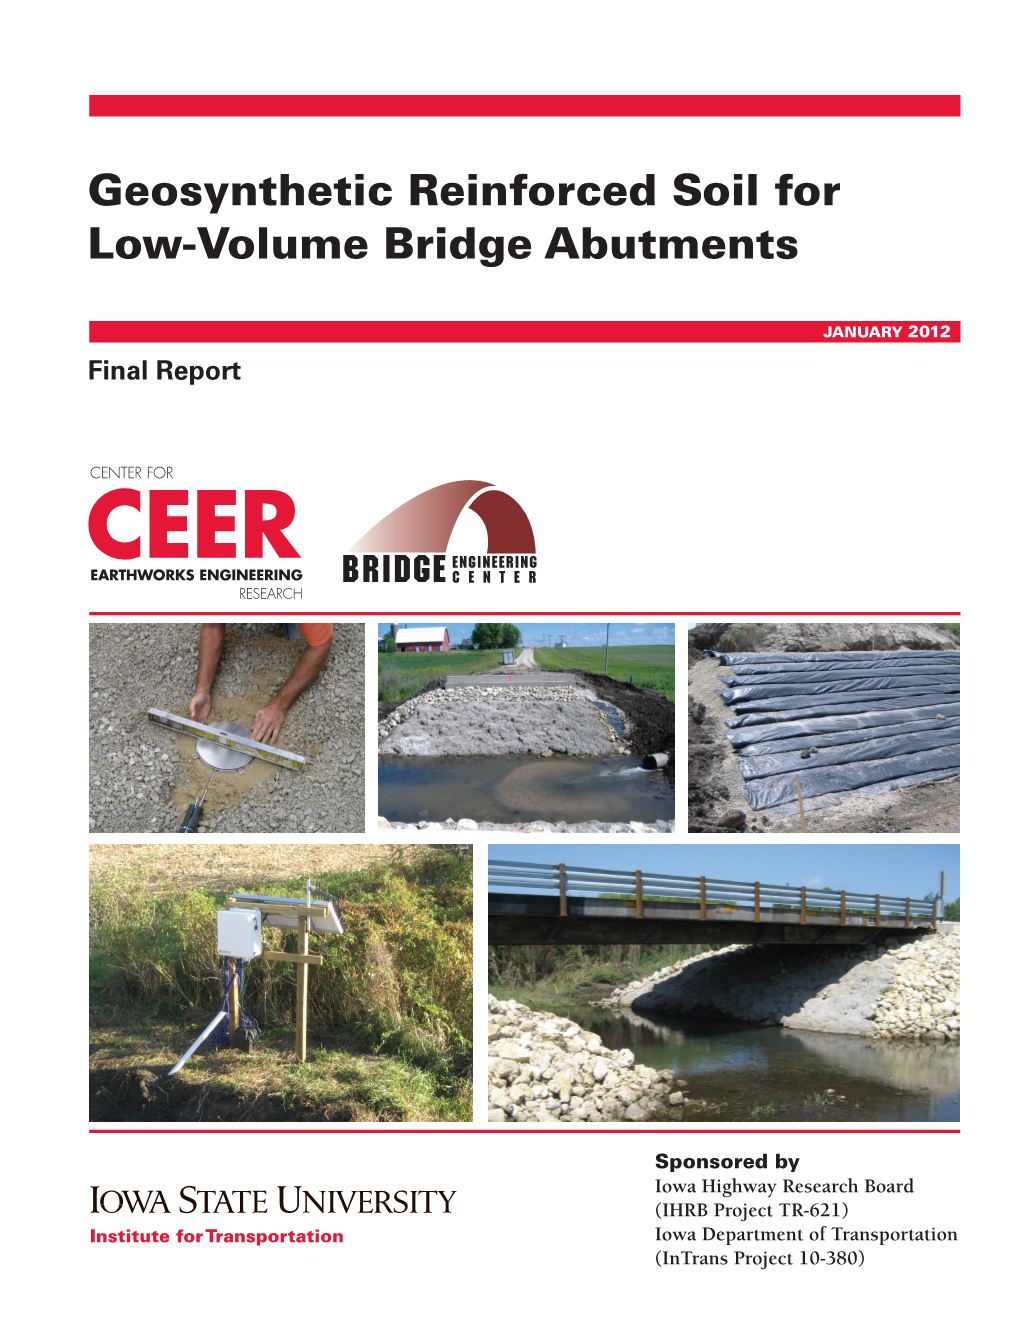 Geosynthetic Reinforced Soil for Low-Volume Bridge Abutments